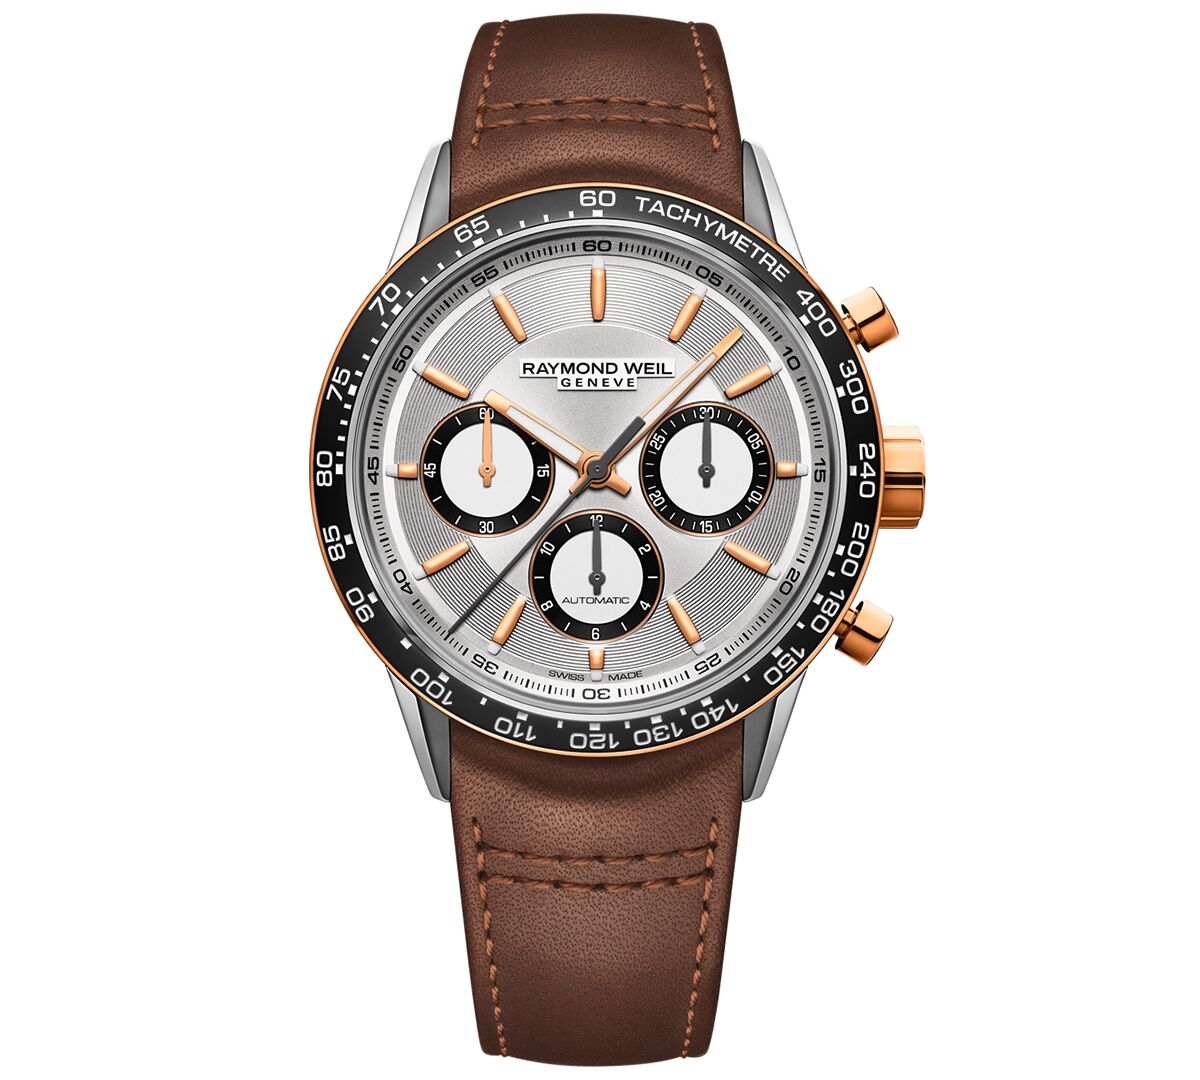 Raymond Weil Men's Swiss Automatic Chronograph Freelancer Brown Leather Strap Watch 43.5mm - Silver